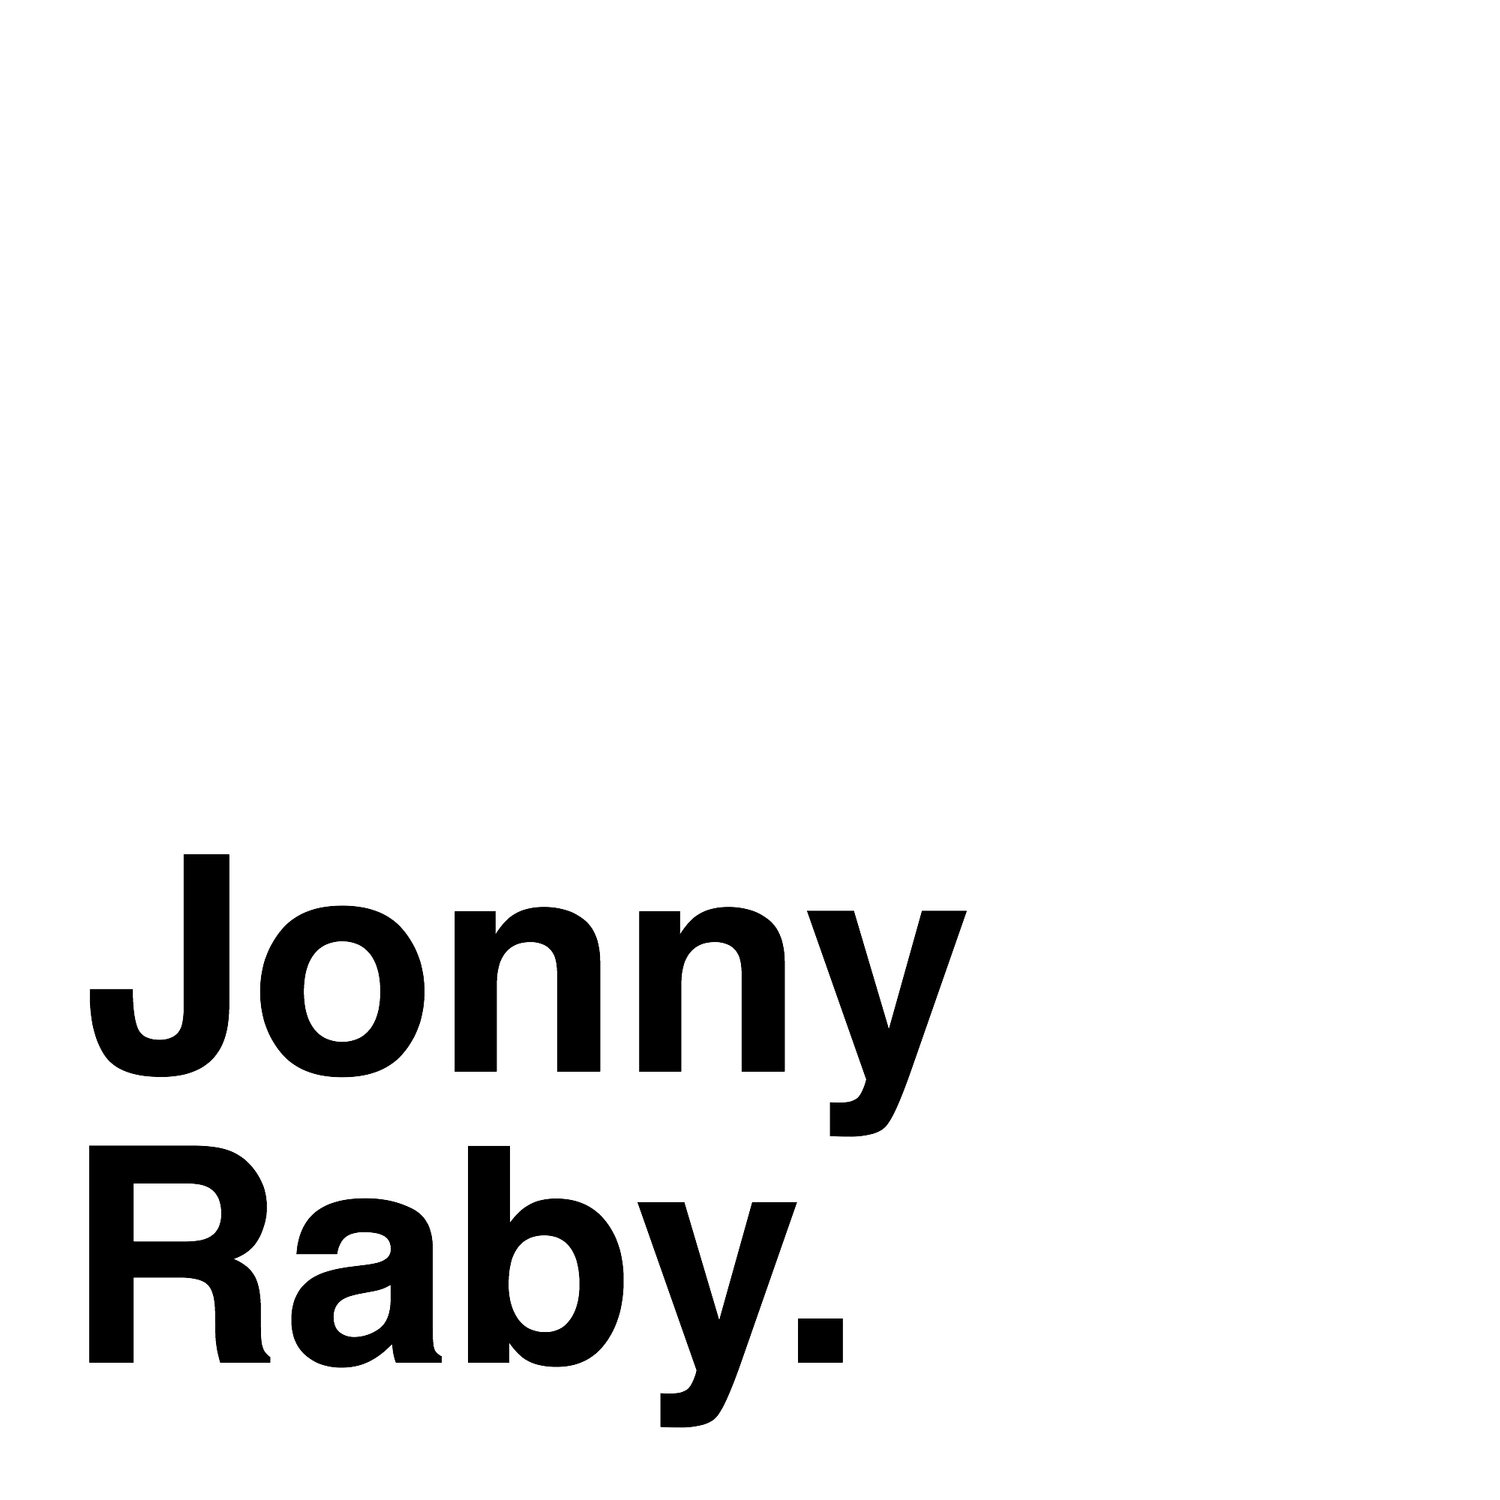 Jonny Raby - Video Producer and Photographer based in Tignes, France